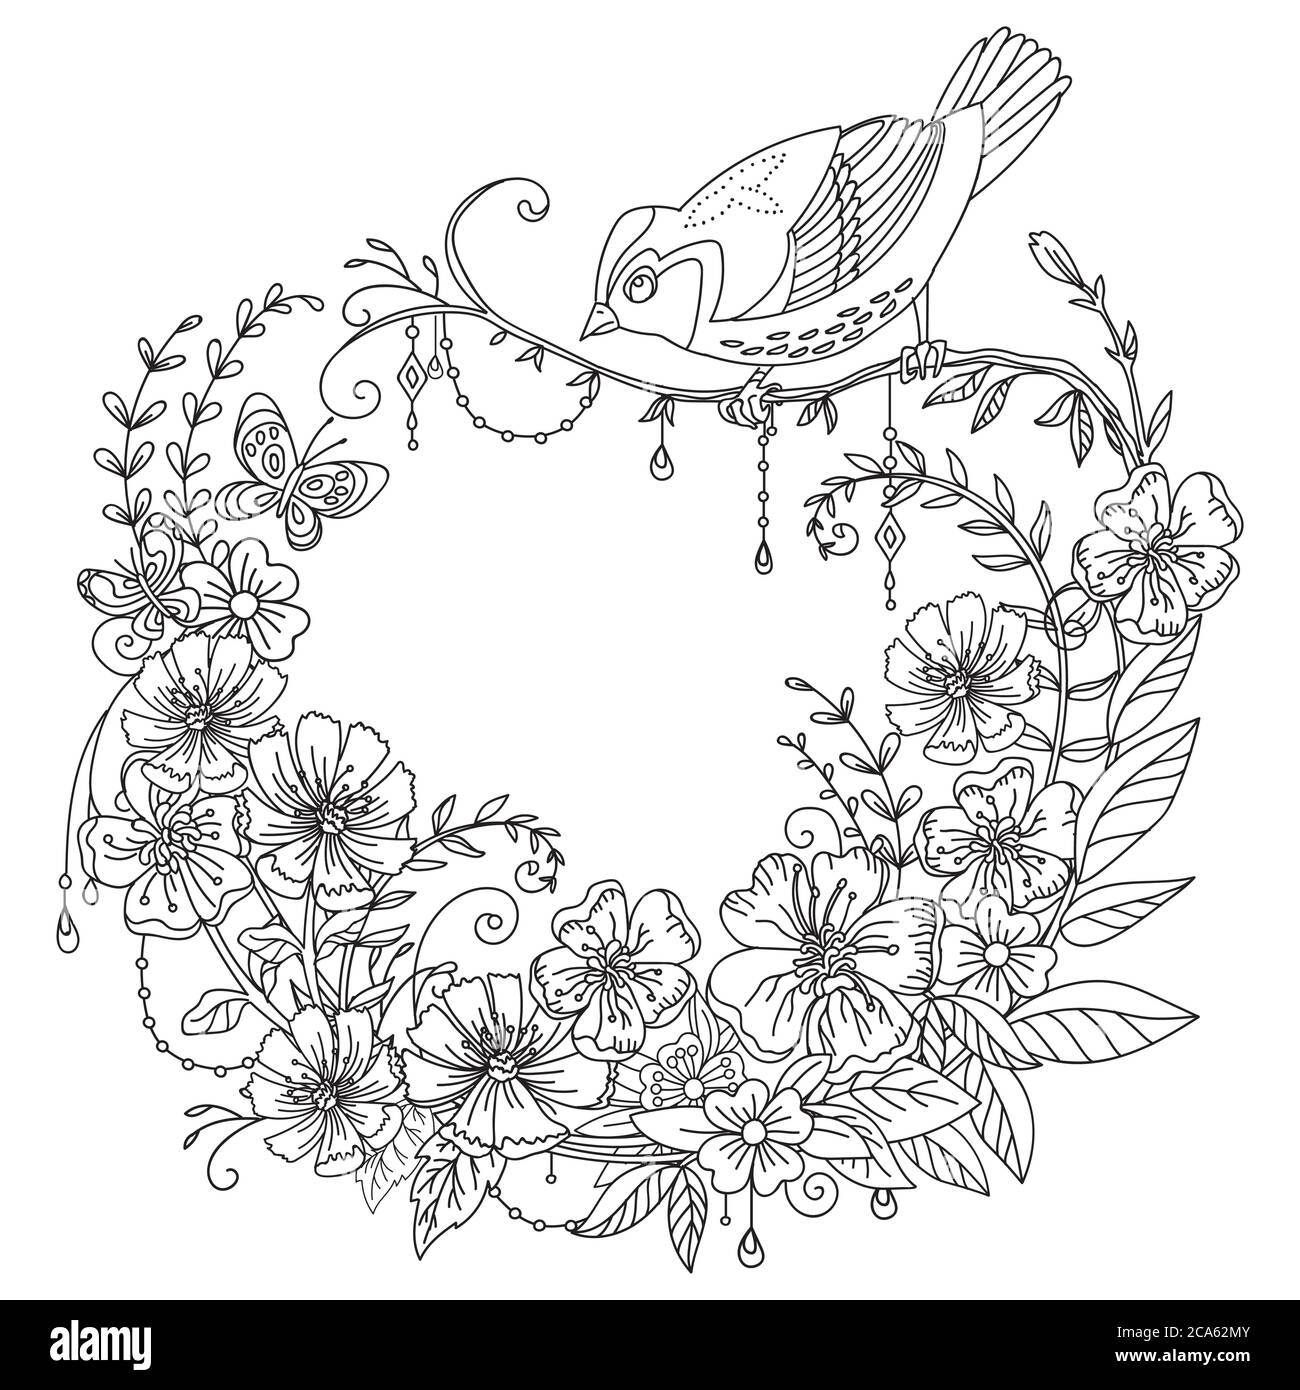 Vector coloring ornamental wreth with songbird and flowers in circle composition. Decorative illustration black contour drawing isolated on white. For Stock Vector